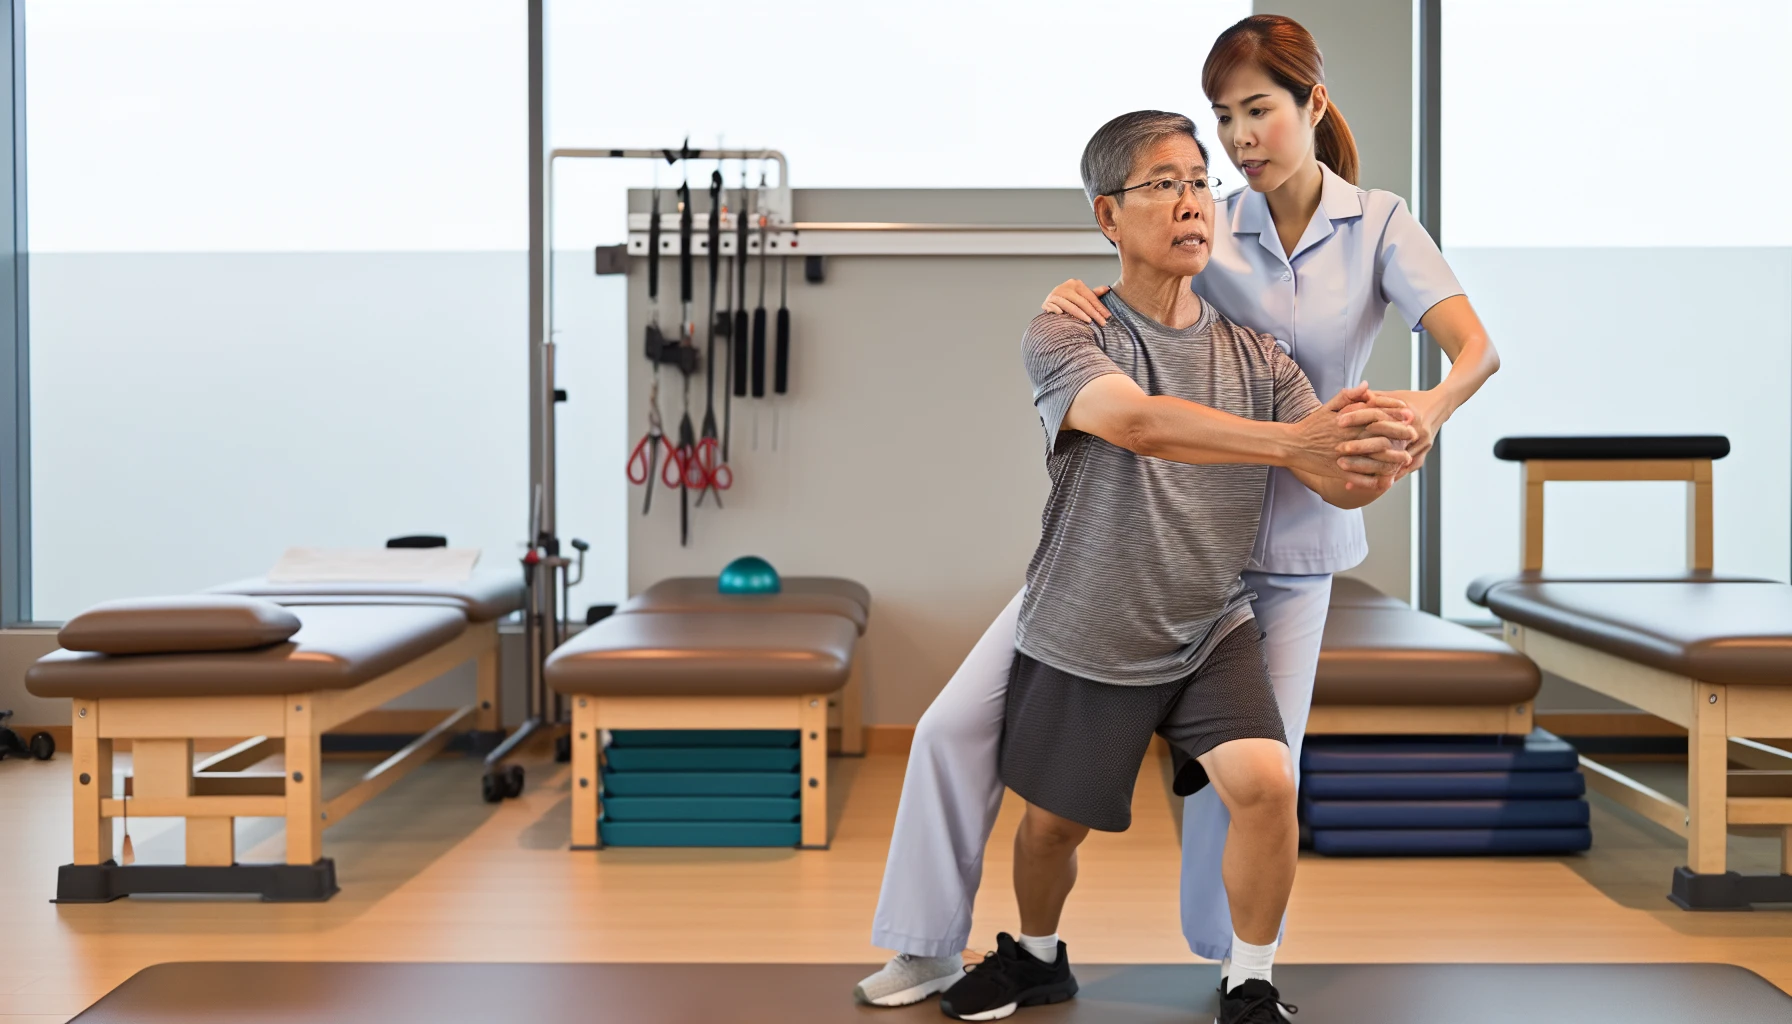 A photo demonstrating gentle exercises suitable for individuals with hip osteoarthritis, promoting joint mobility and flexibility.